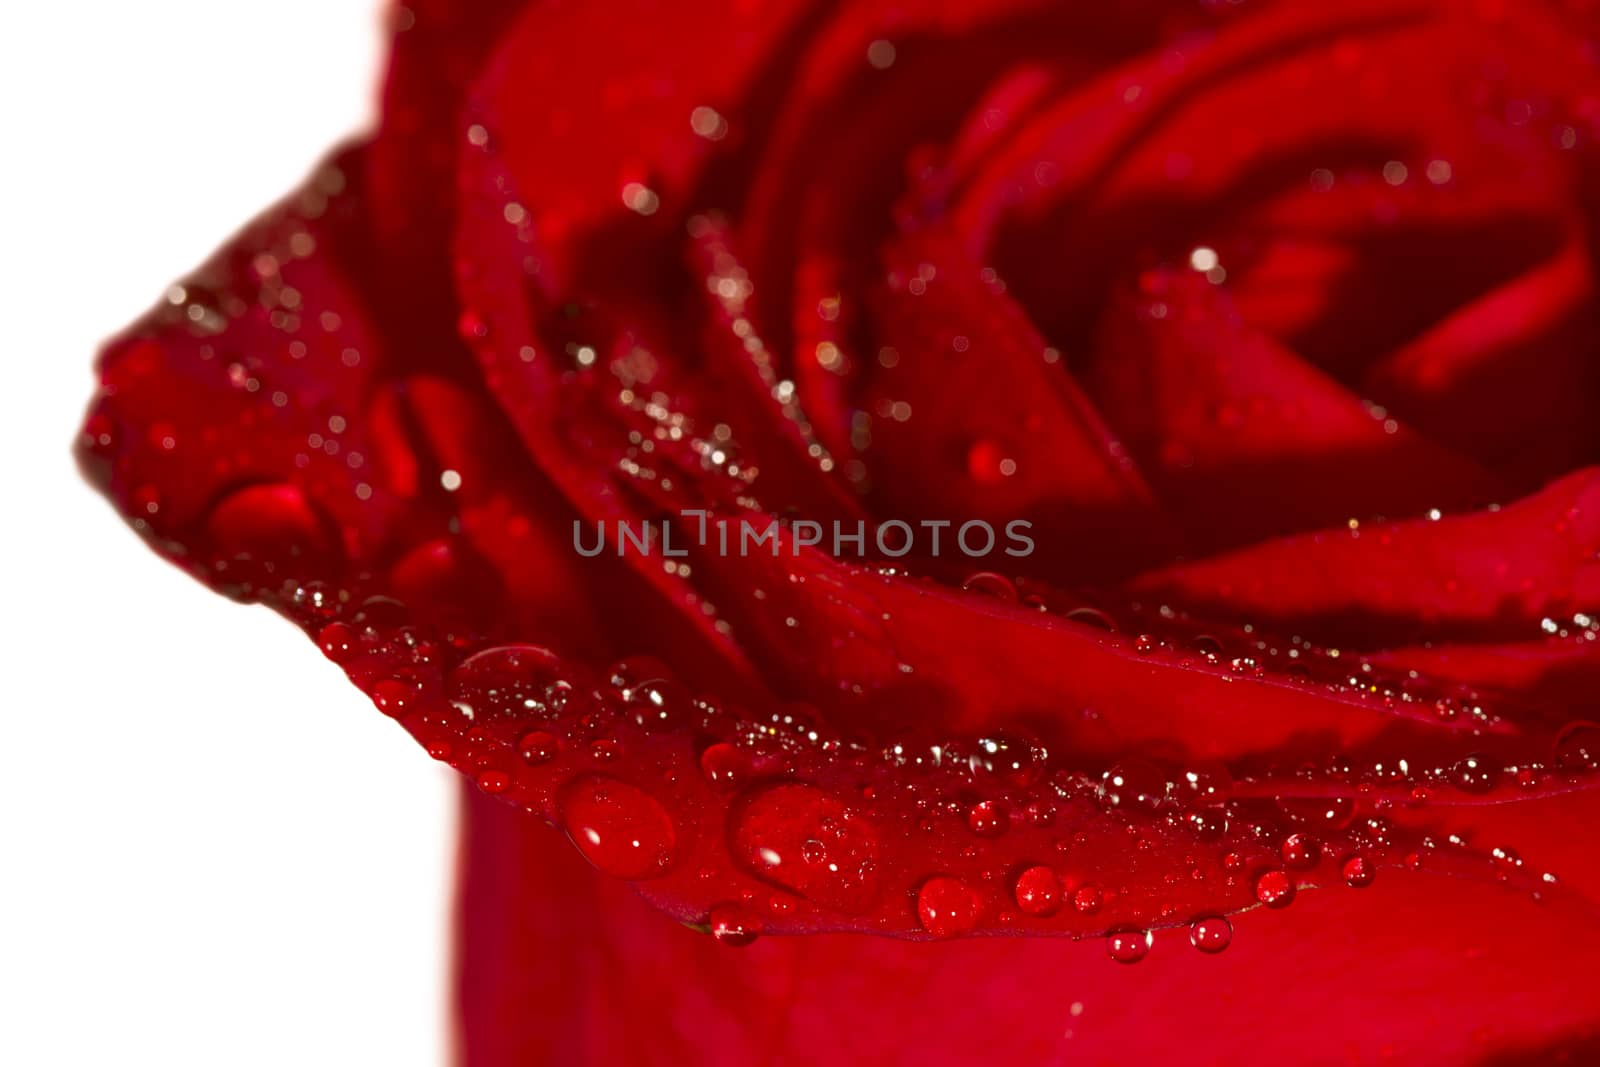 Closeup of red rose with drops isolated on white